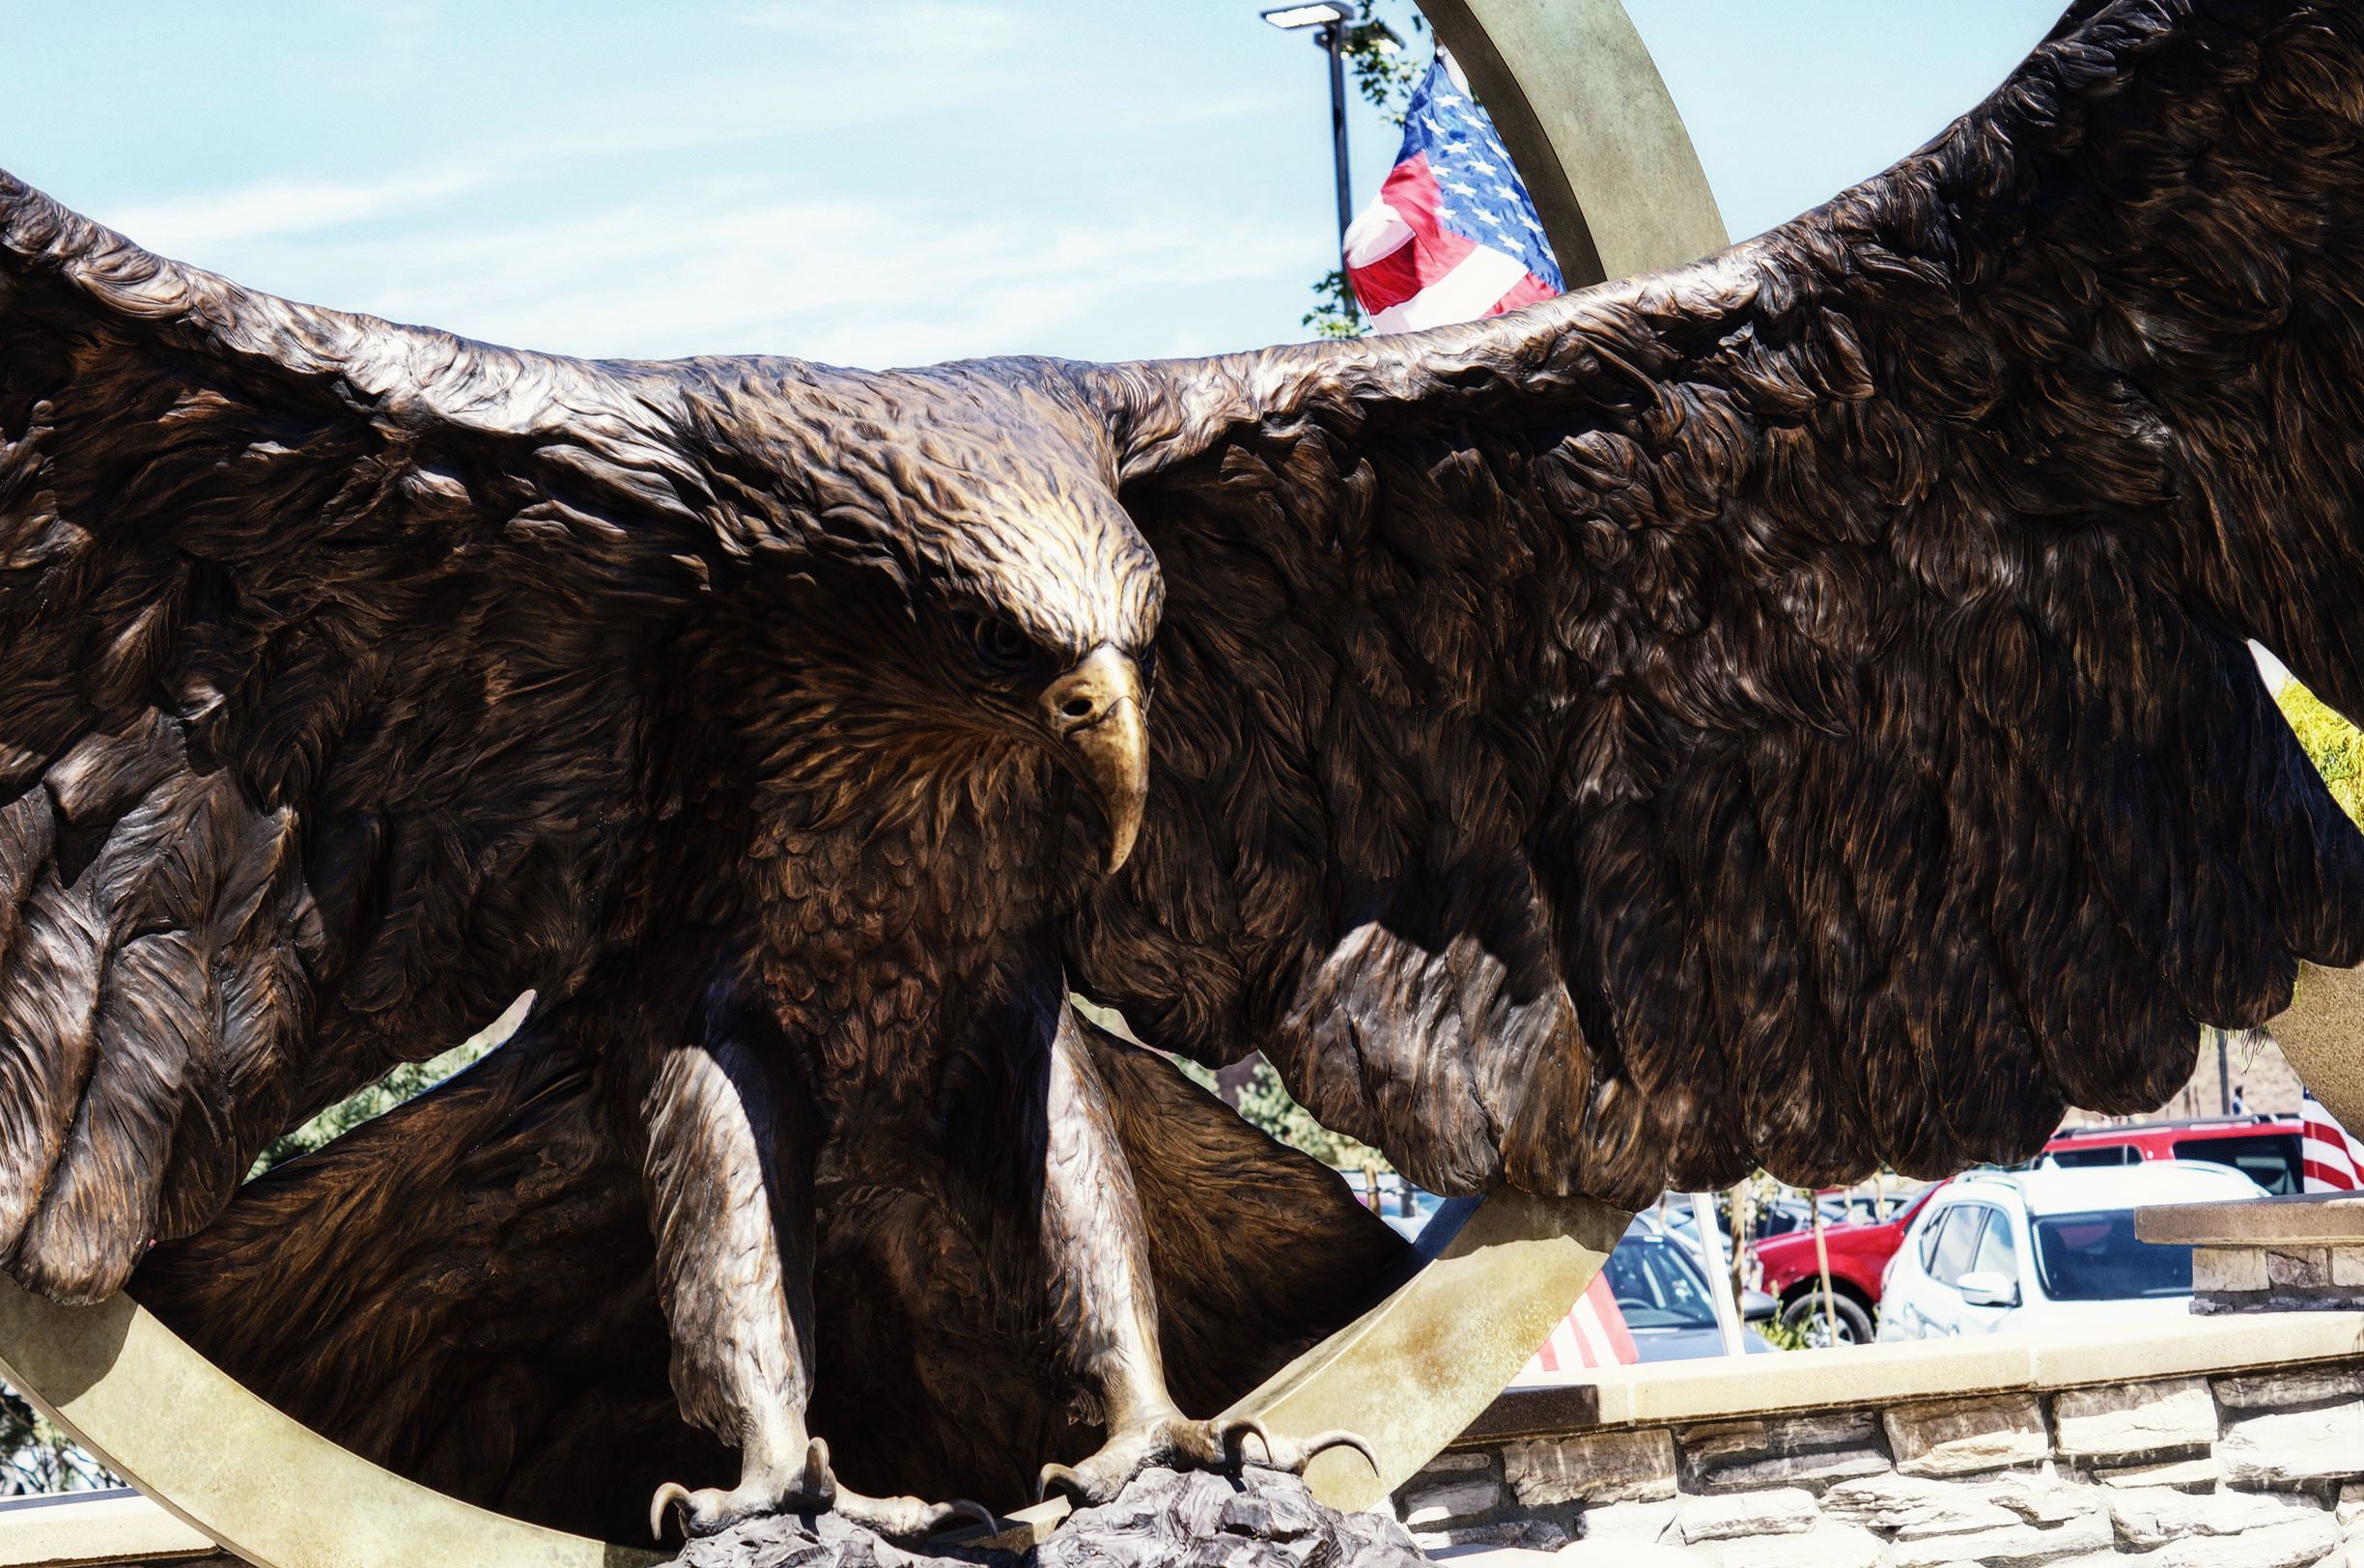 Majestic – 13-foot eagle for Mountain View Village